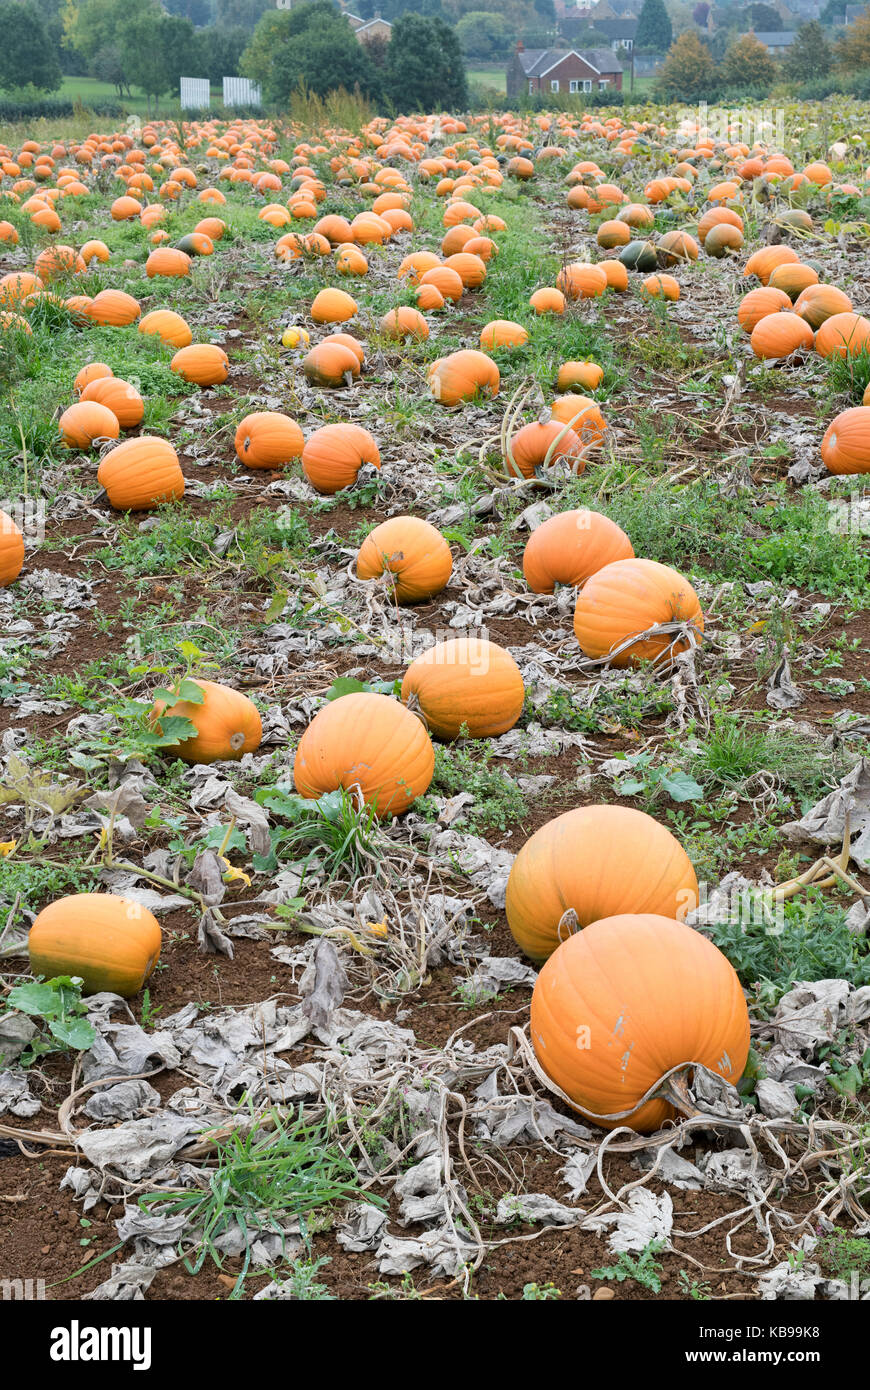 Pumpkins growing in a farmers field. Bodicote, Oxfordshire, England Stock Photo